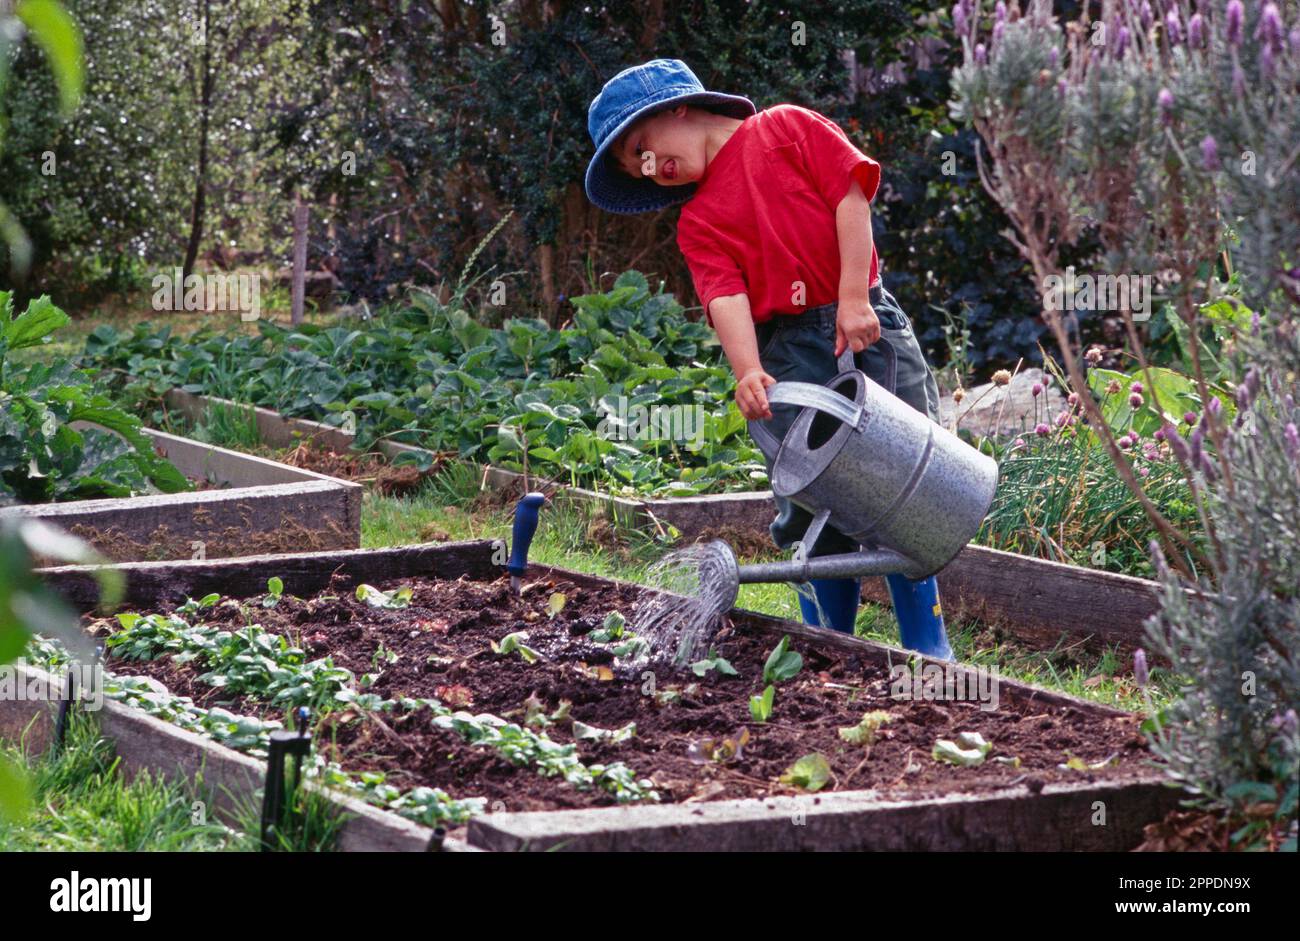 Child (boy) in a red t-shirt, with tongue between teeth, watering-in newly planted lettuce seedlings in a raised bed. Stock Photo